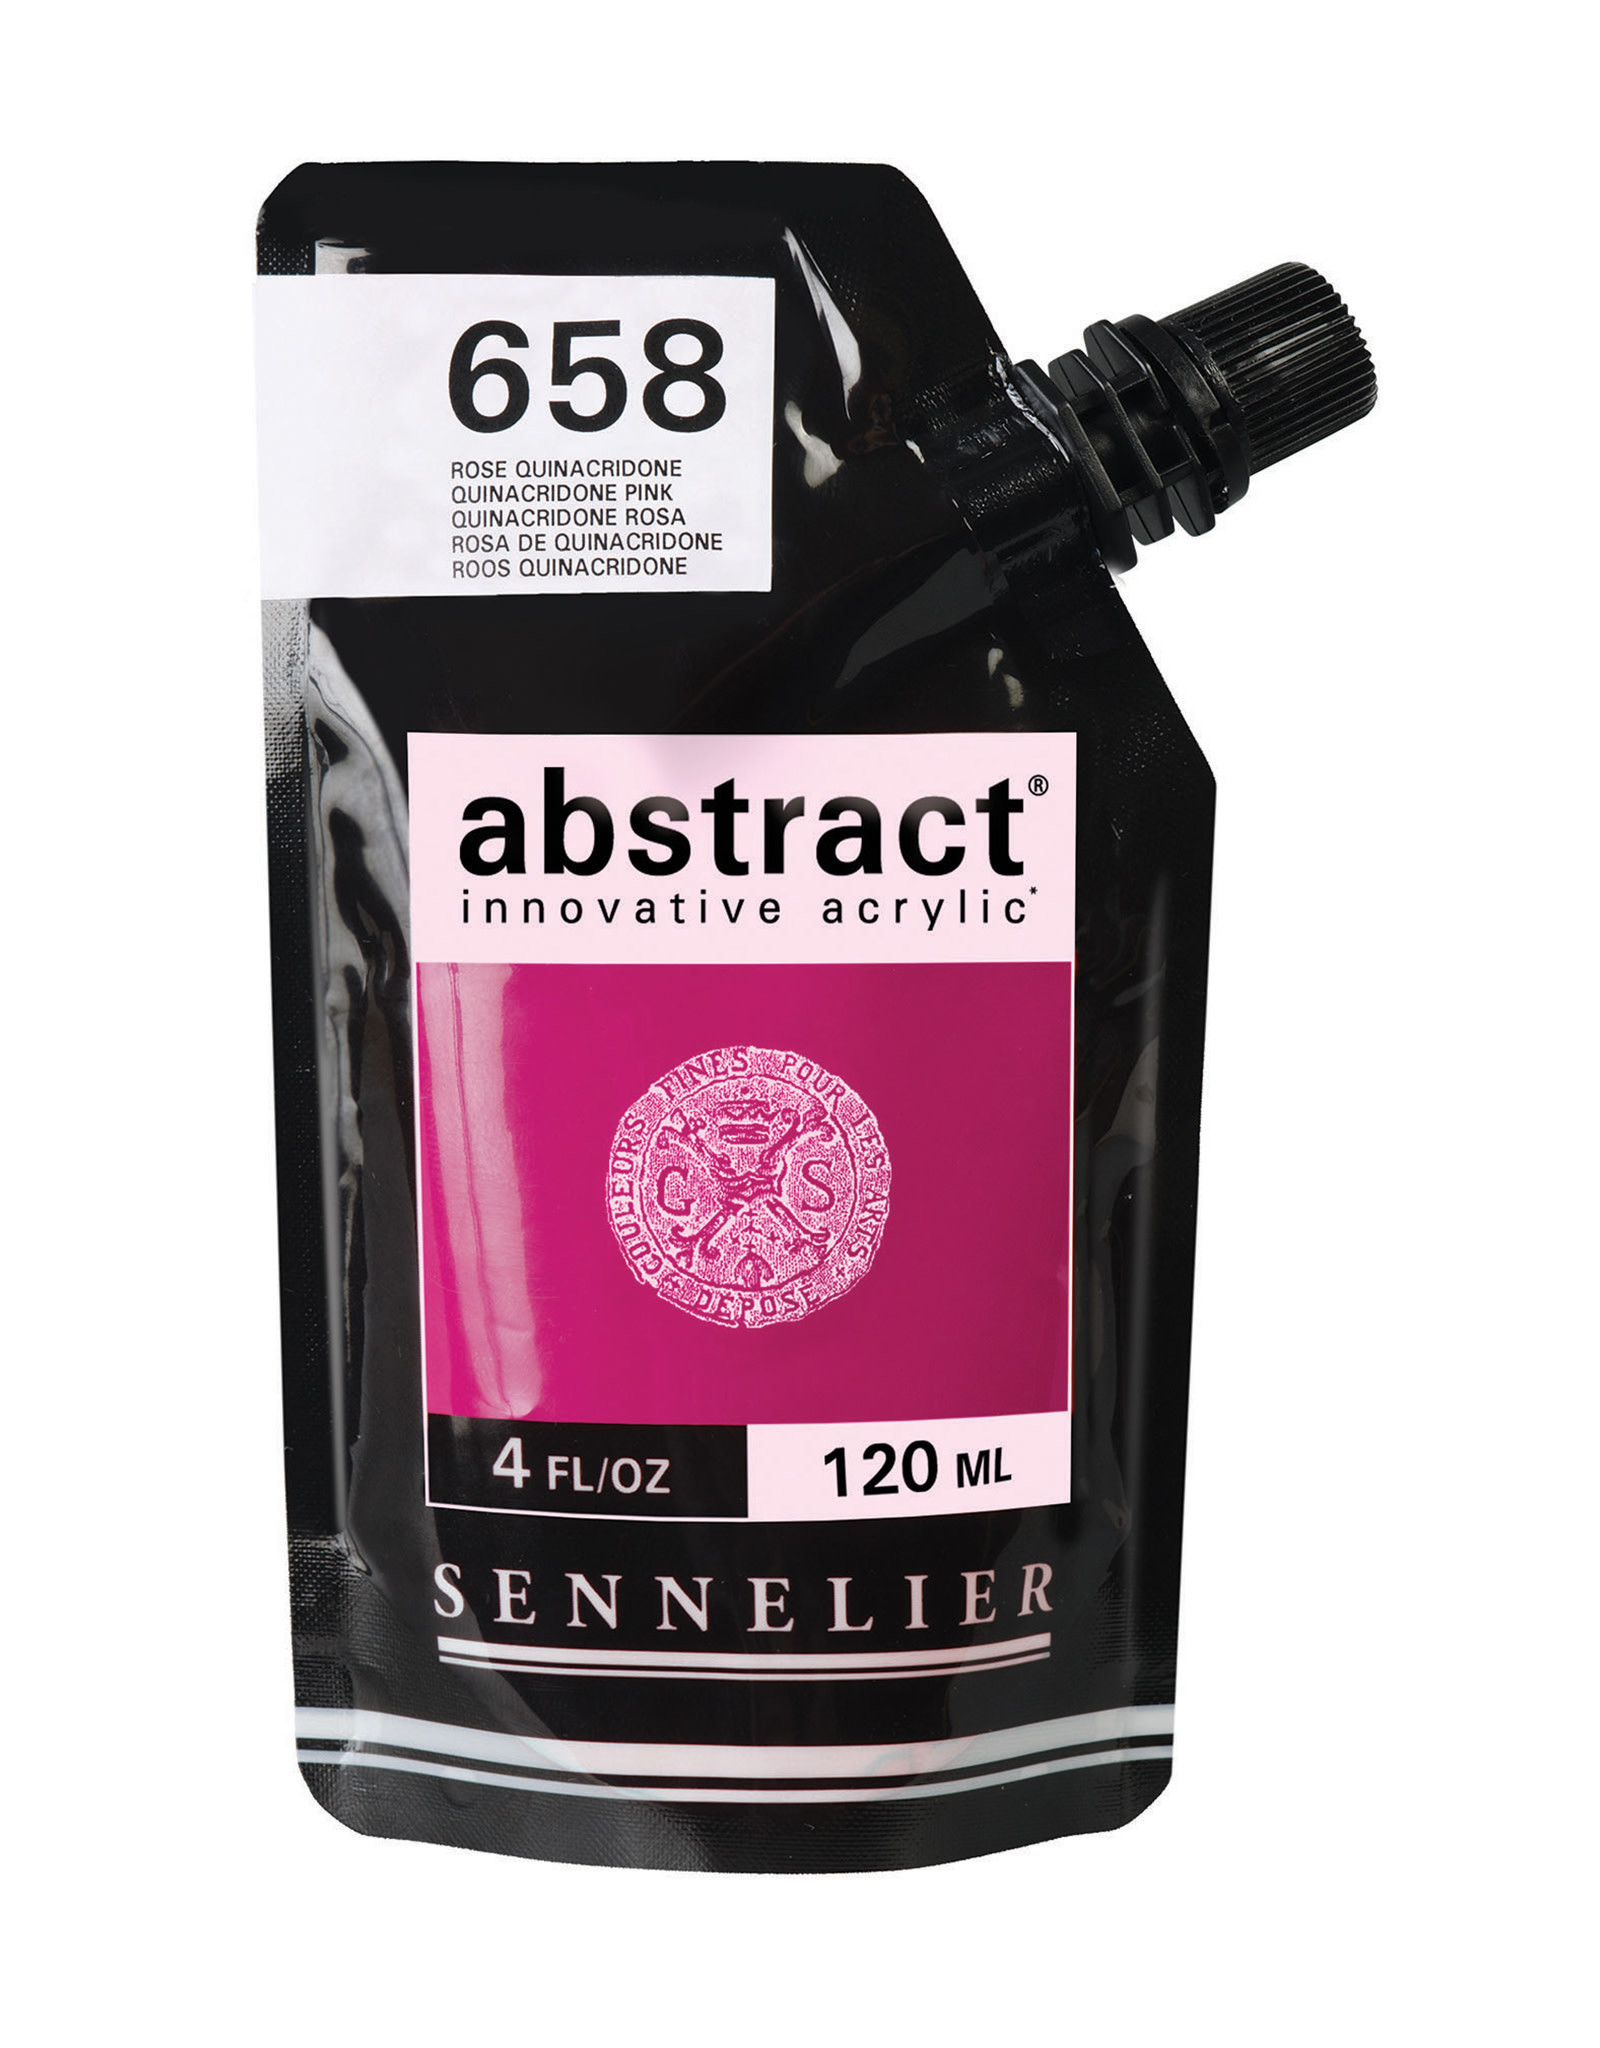 Sennelier Sennelier Abstract Acrylic, Quinacridone Pink 120ml